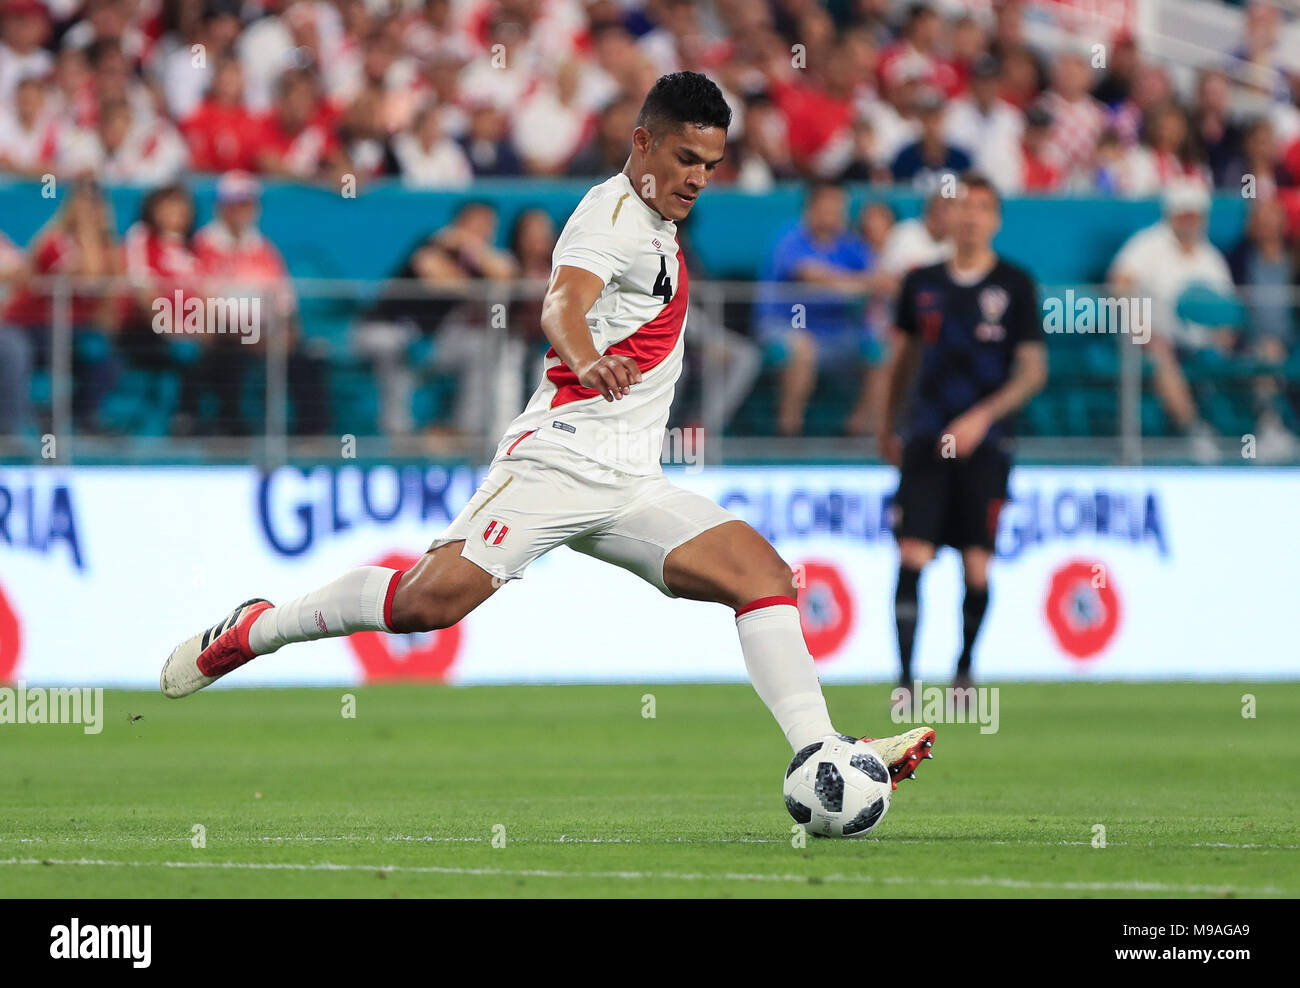 Miami Gardens, Florida, USA. 23rd Mar, 2018. Peru midfielder Anderson Santamaria (4) in action during a FIFA World Cup 2018 preparation match between the Peru National Soccer Team and the Croatia National Soccer Team at the Hard Rock Stadium in Miami Gardens, Florida. Credit: Mario Houben/ZUMA Wire/Alamy Live News Stock Photo